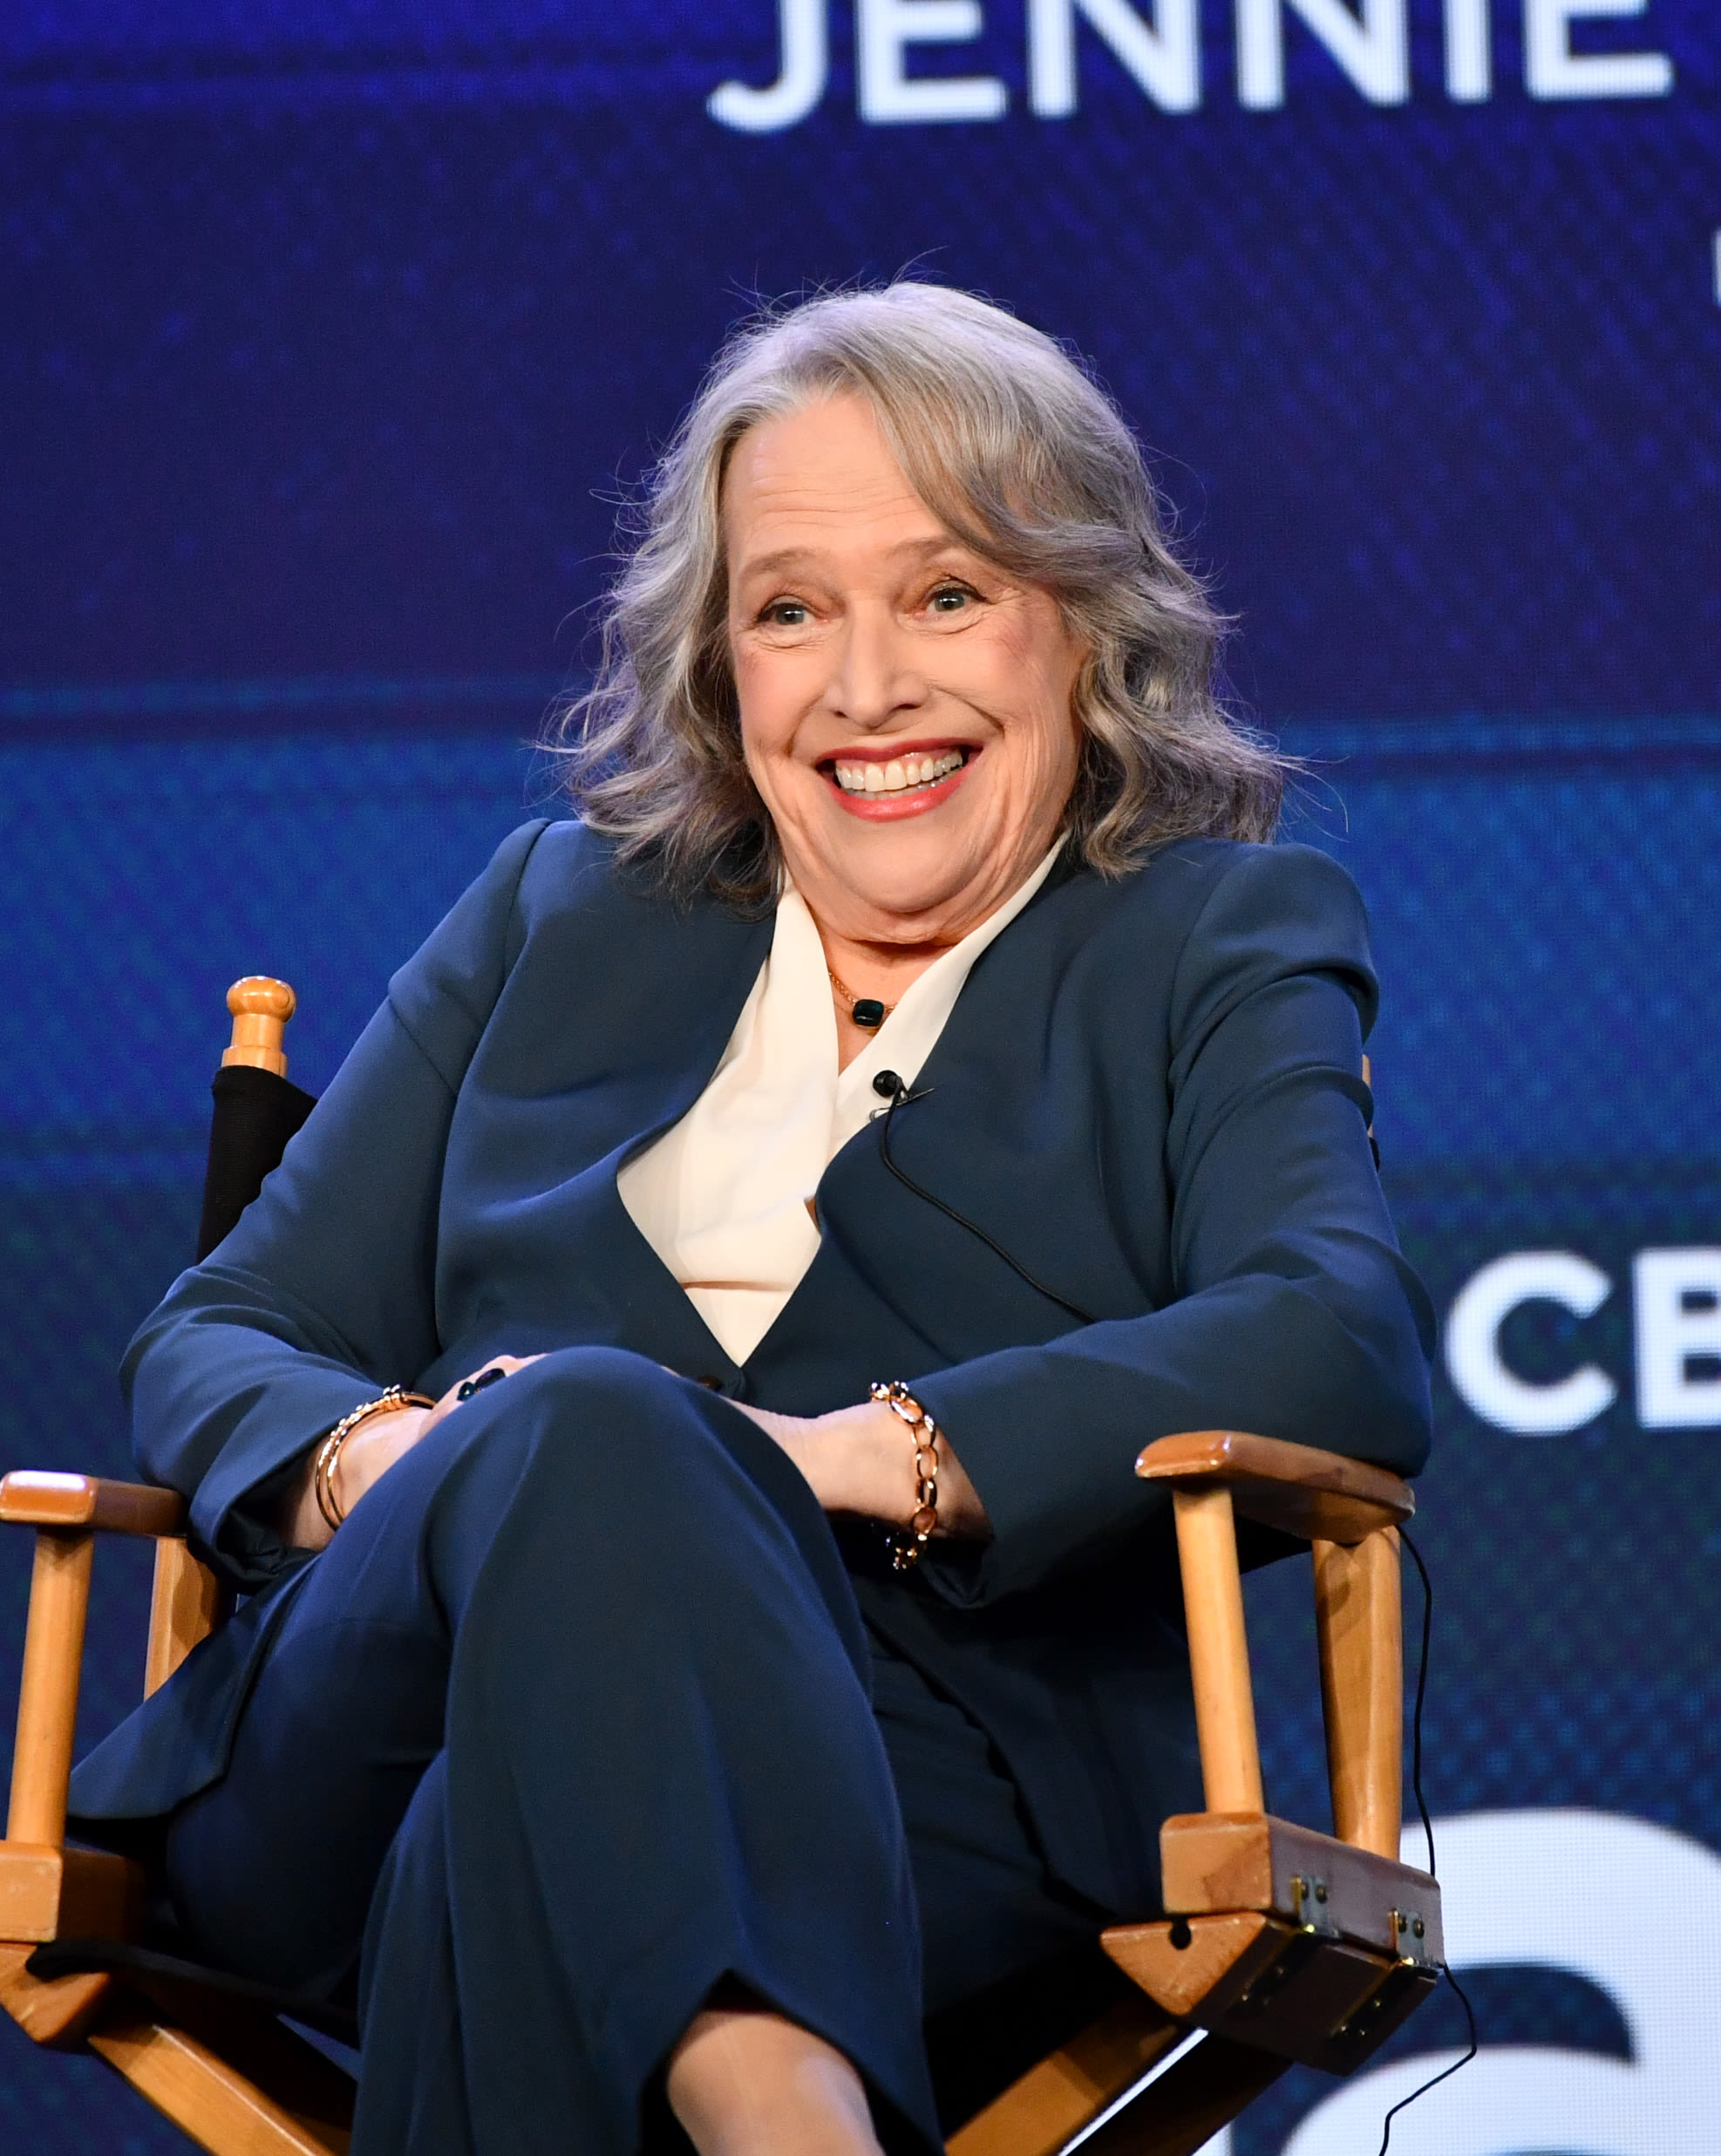 Kathy Bates Reveals Why She Feels ‘Really Lucky’ to Star on Upcoming TV Series ‘Matlock’